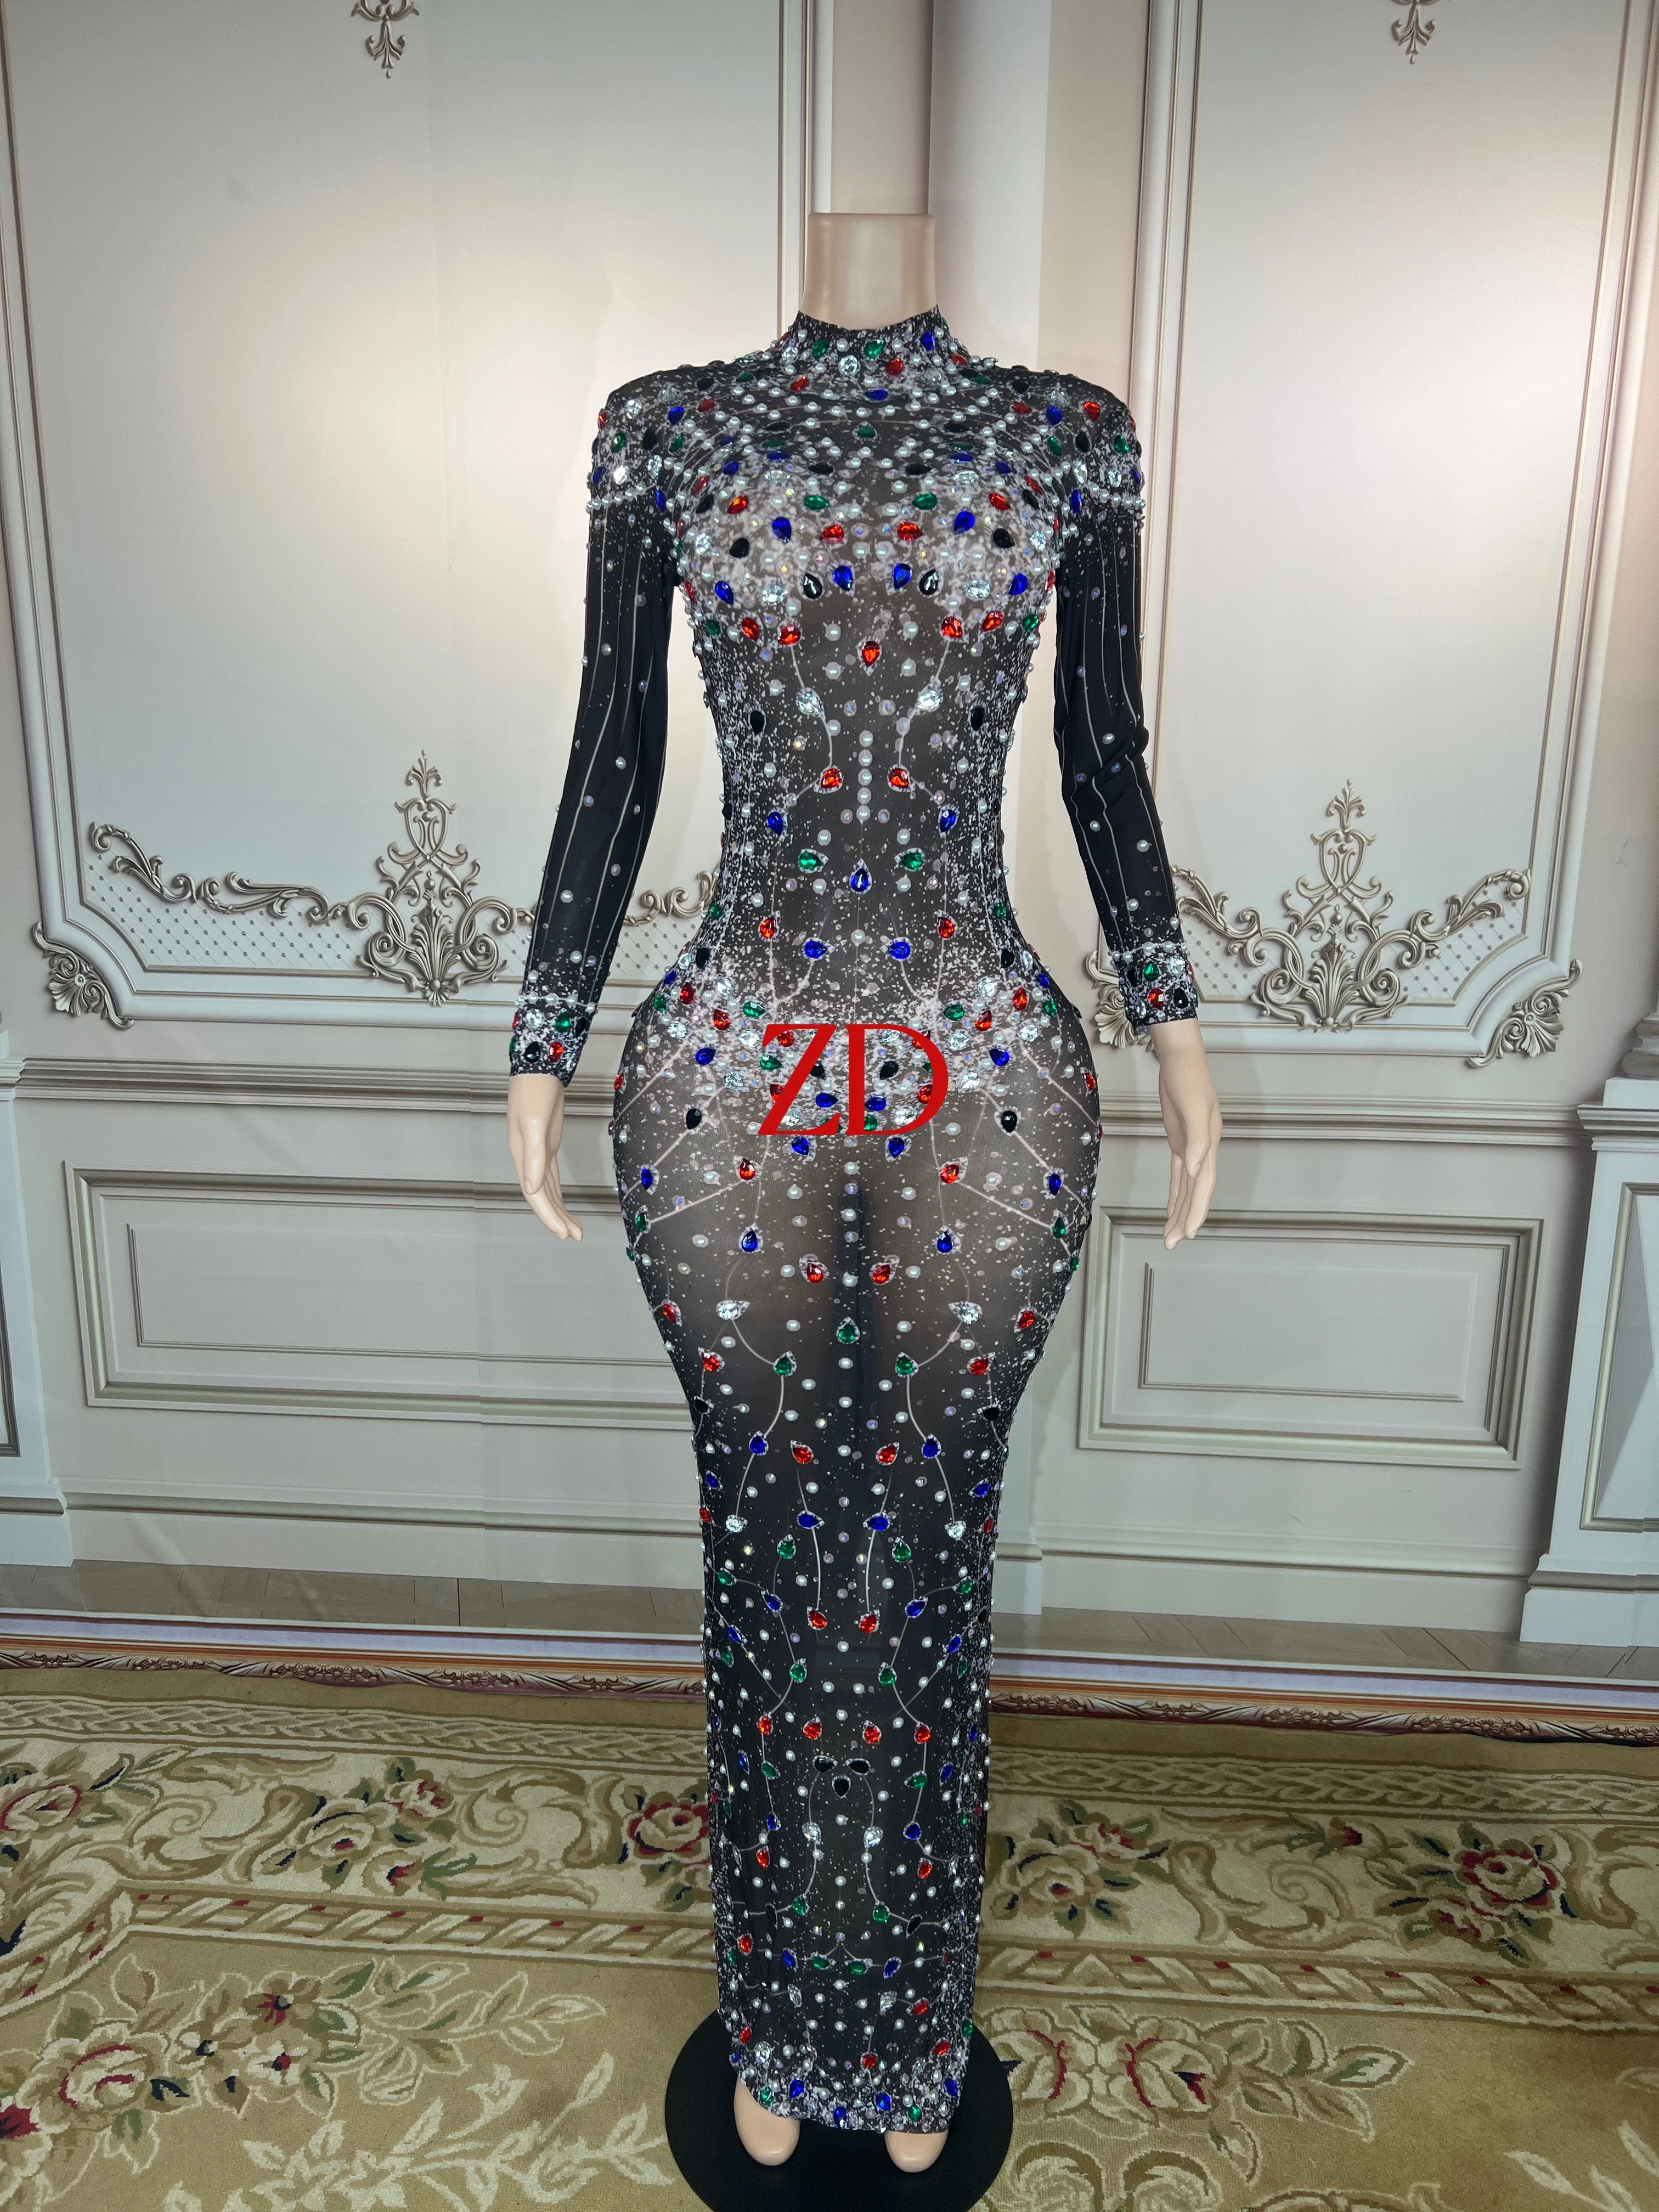 Colorful Crystals Pearls Sexy Mesh Dress Prom Evening Sexy Transparent Multicolor Rhinestones Costume BirthdaySleeves